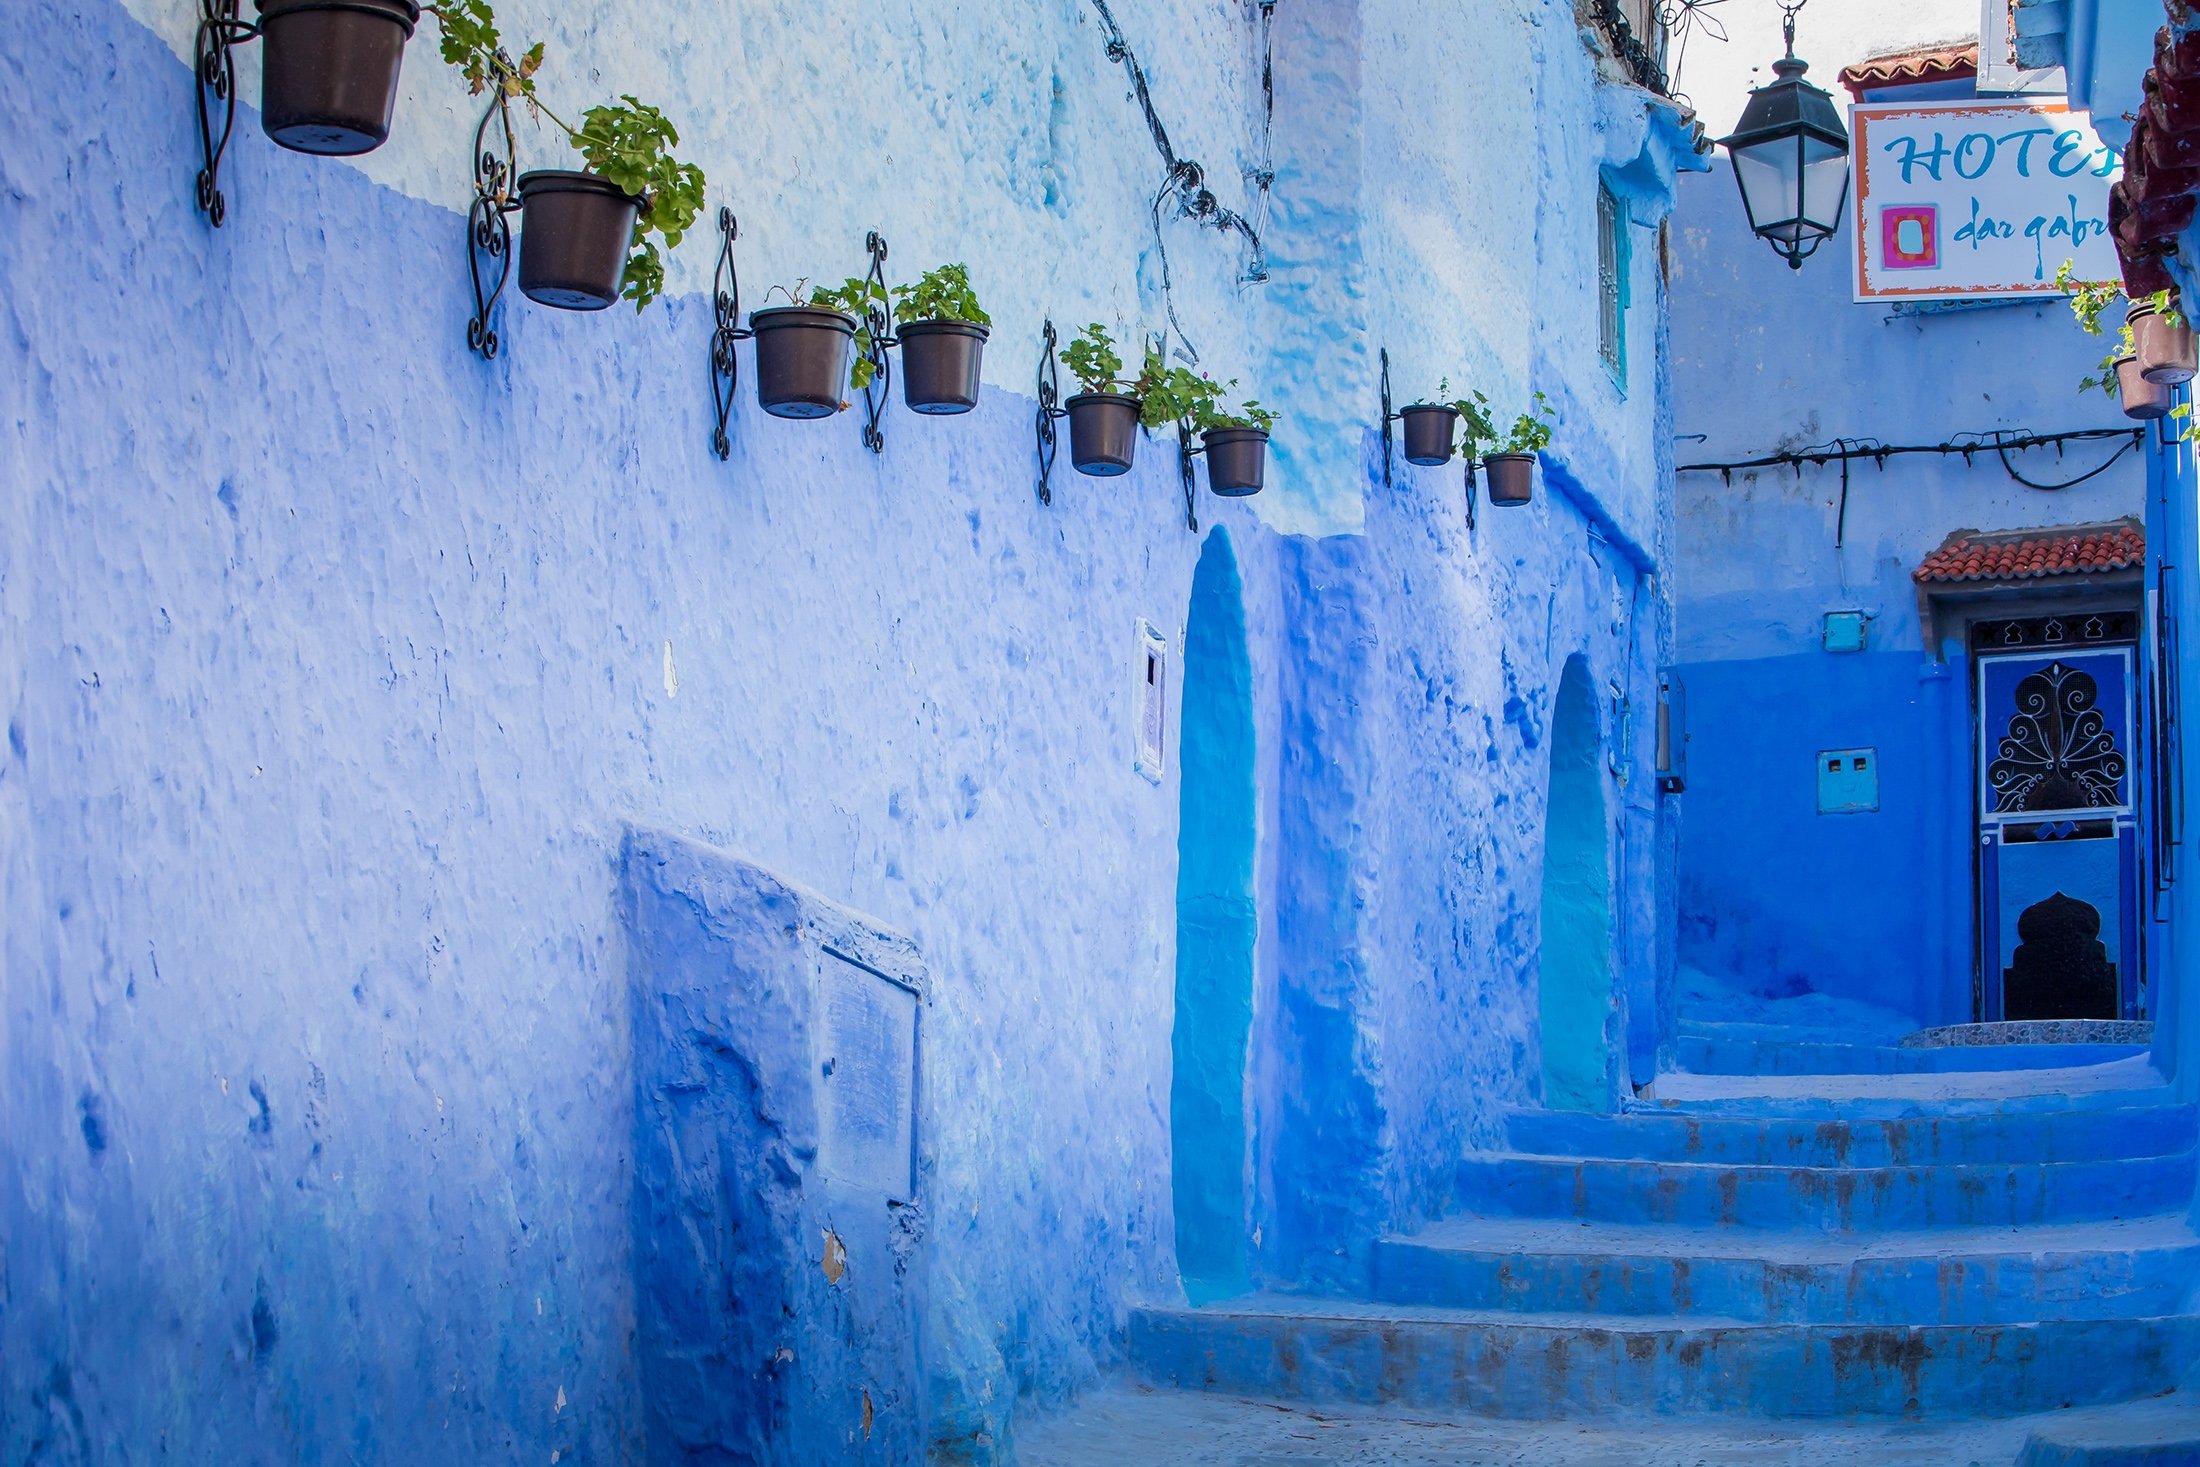 The original inhabitants of Chefchaouen in Morocco painted the entire town blue to dampen the glare of the sun. (dpa Photo)